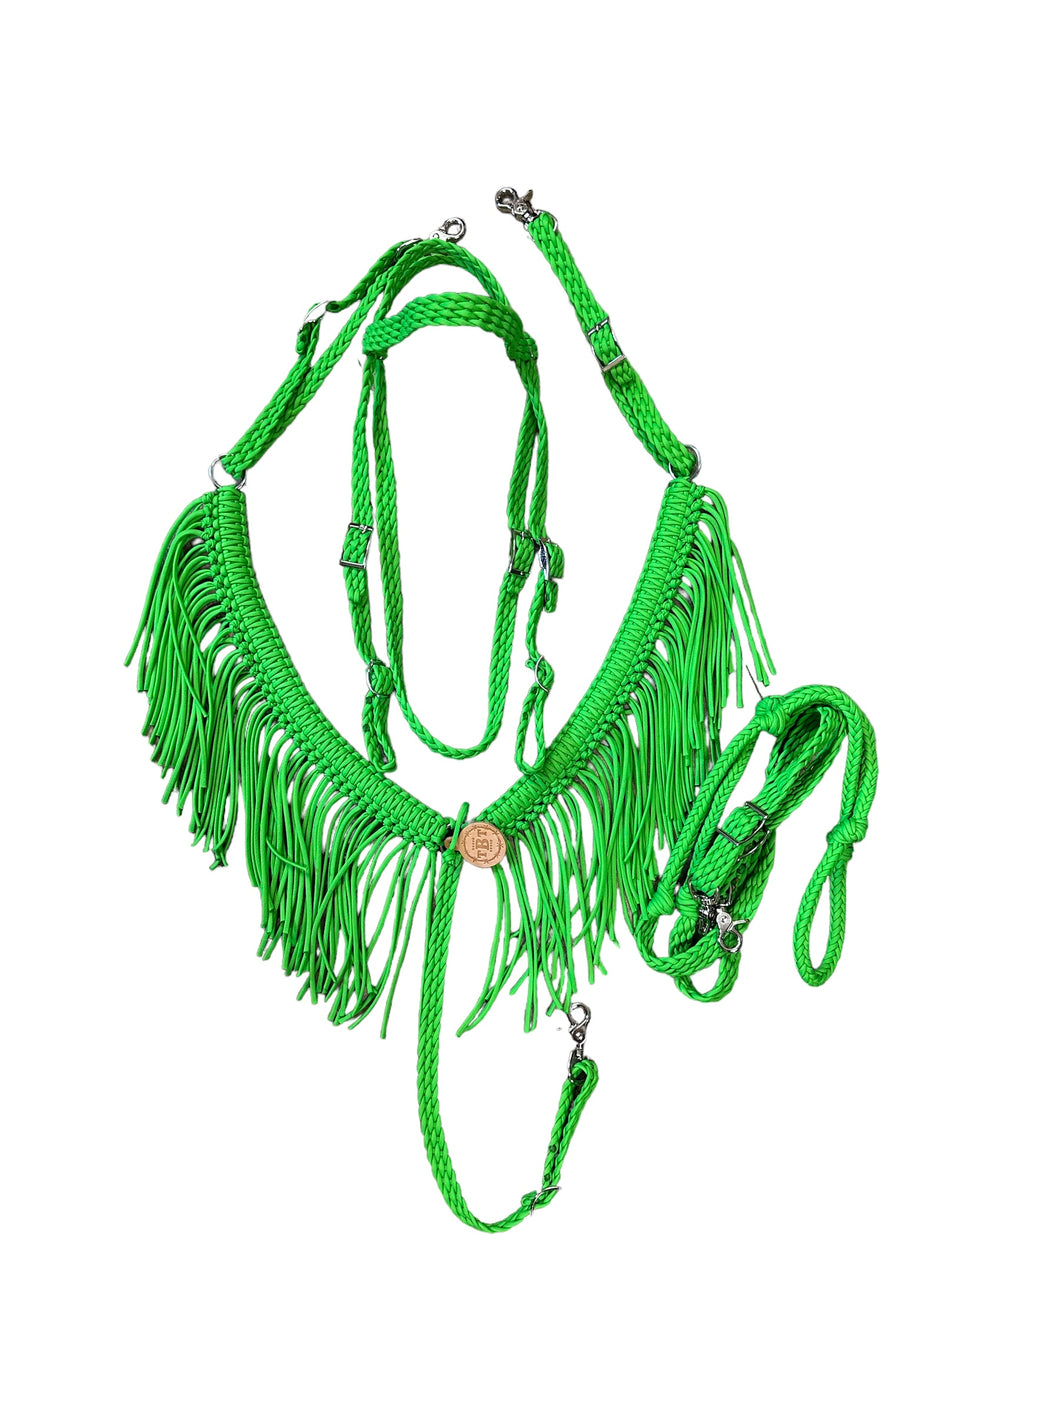 Neon green Tack set …. All sizes